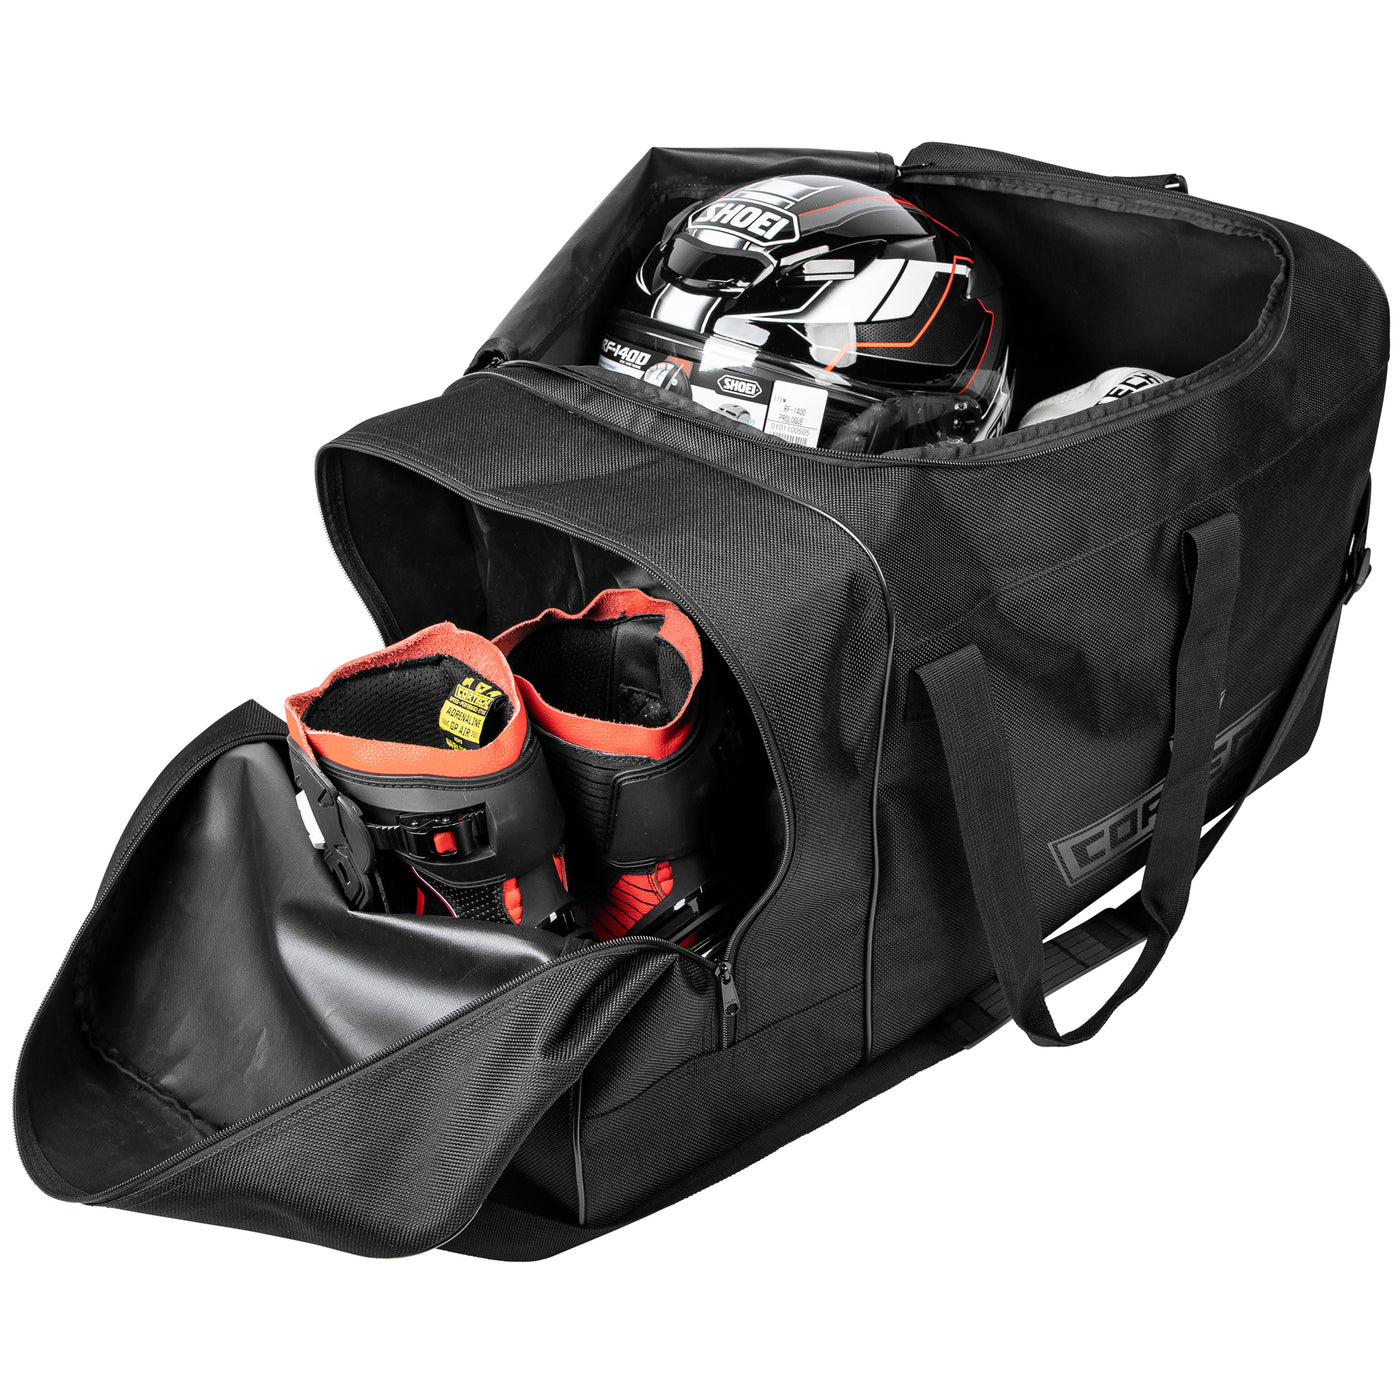 Cortech Day Tripper Gear Bag filled with all of your gear